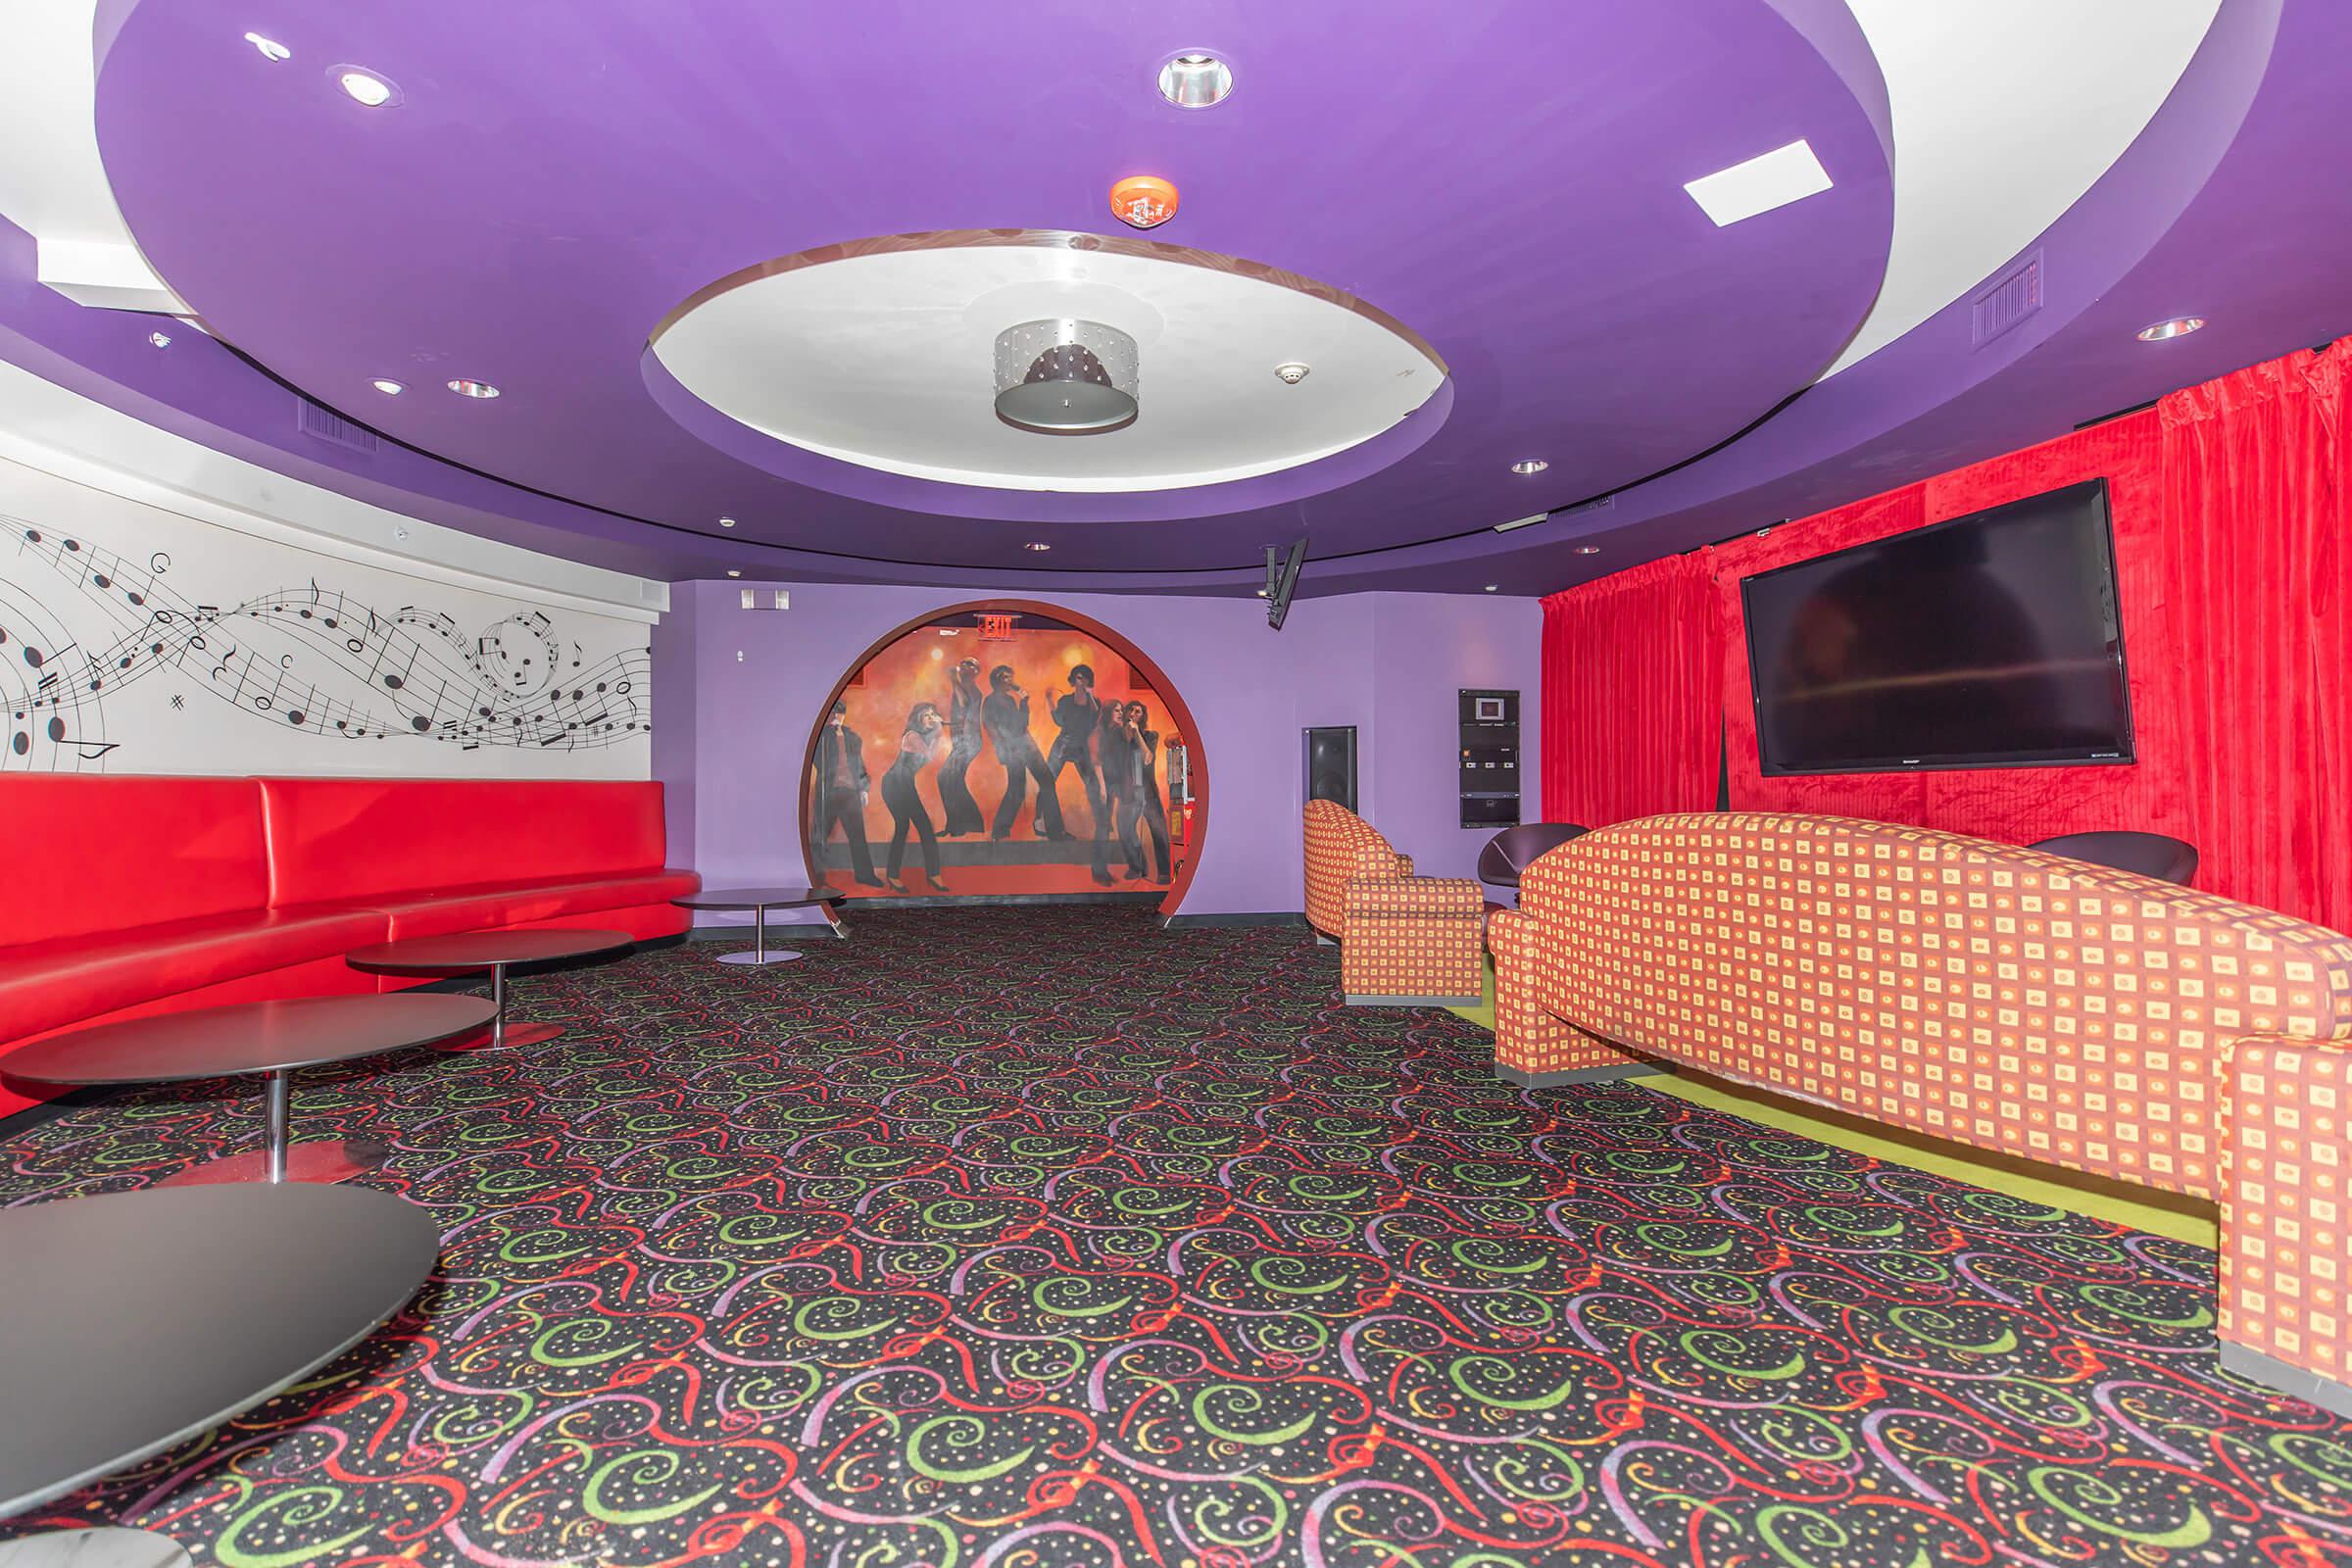 The Orsini community room with a purple ceiling